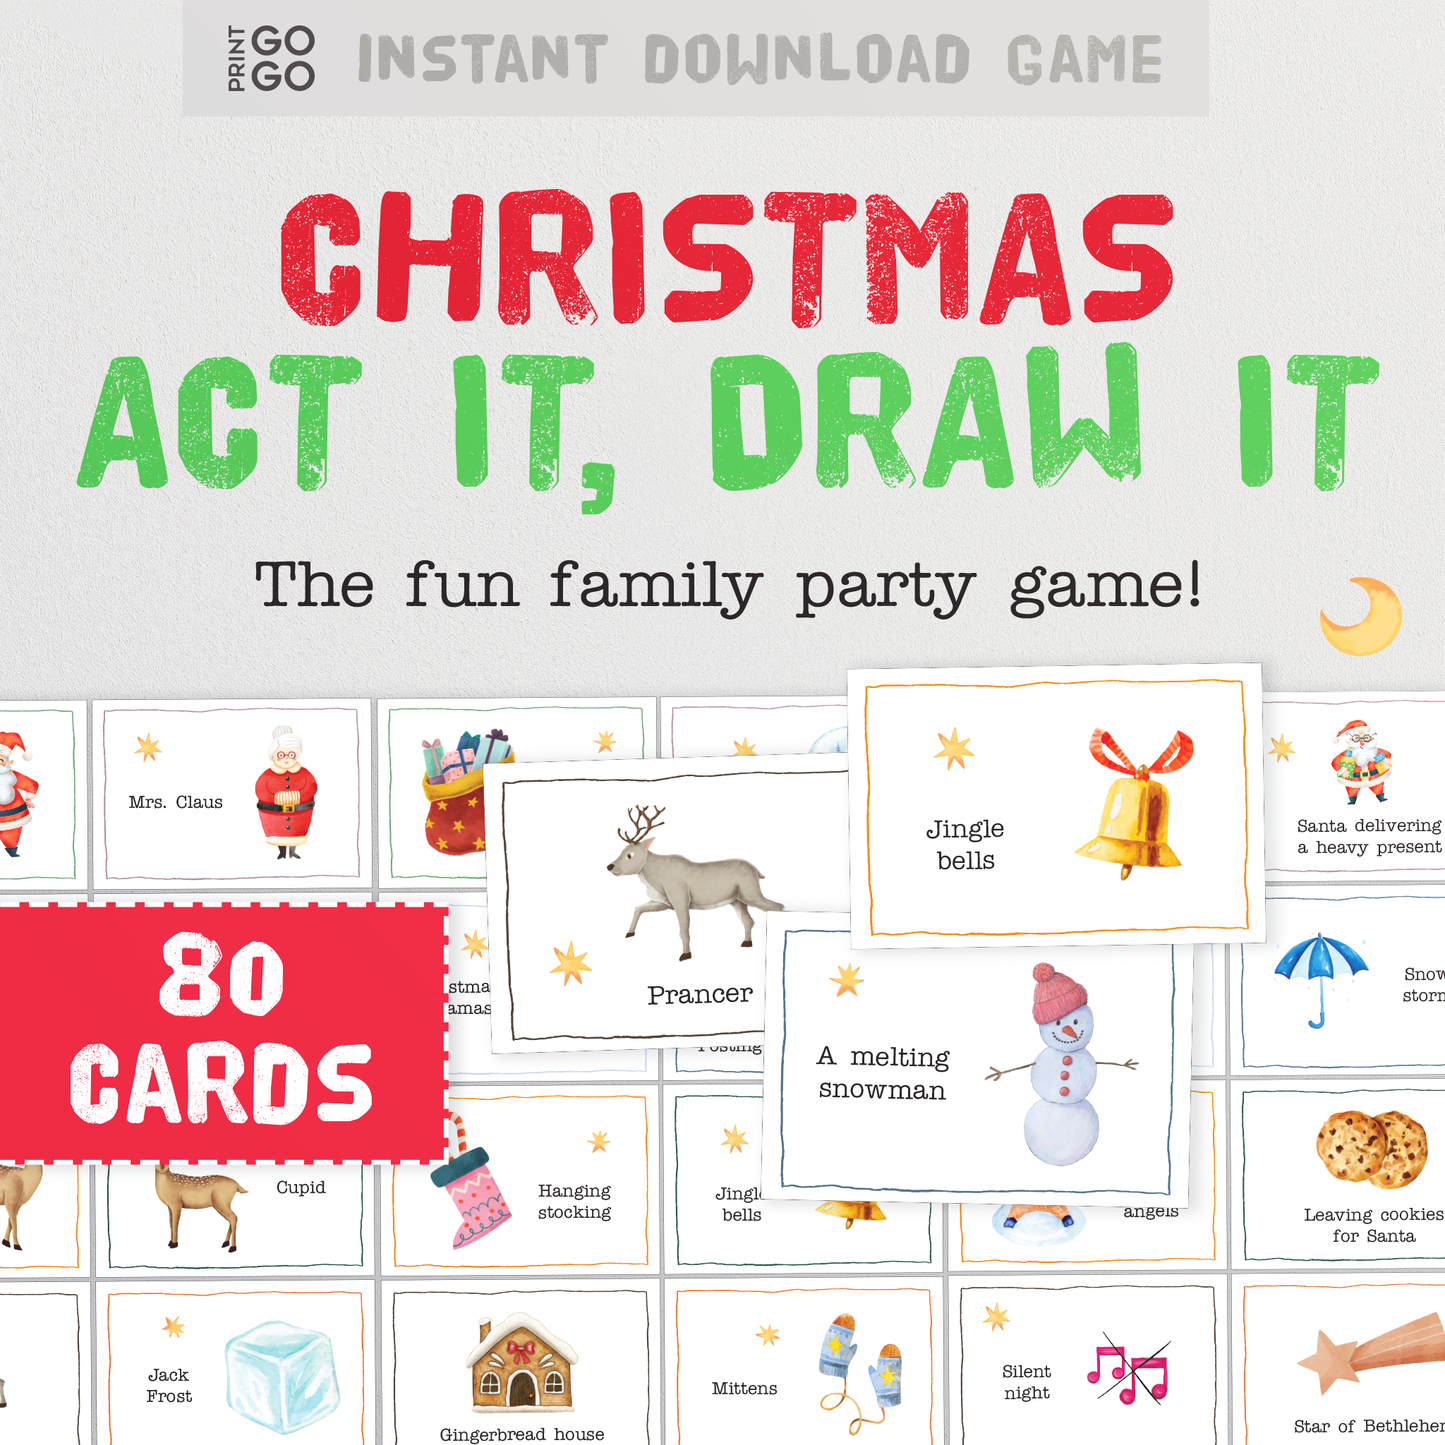 Christmas Act It, Draw It - The Hilarious Family Party Game of Acting Out, Drawing and Guessing Phrases | Printable Charades Group Games